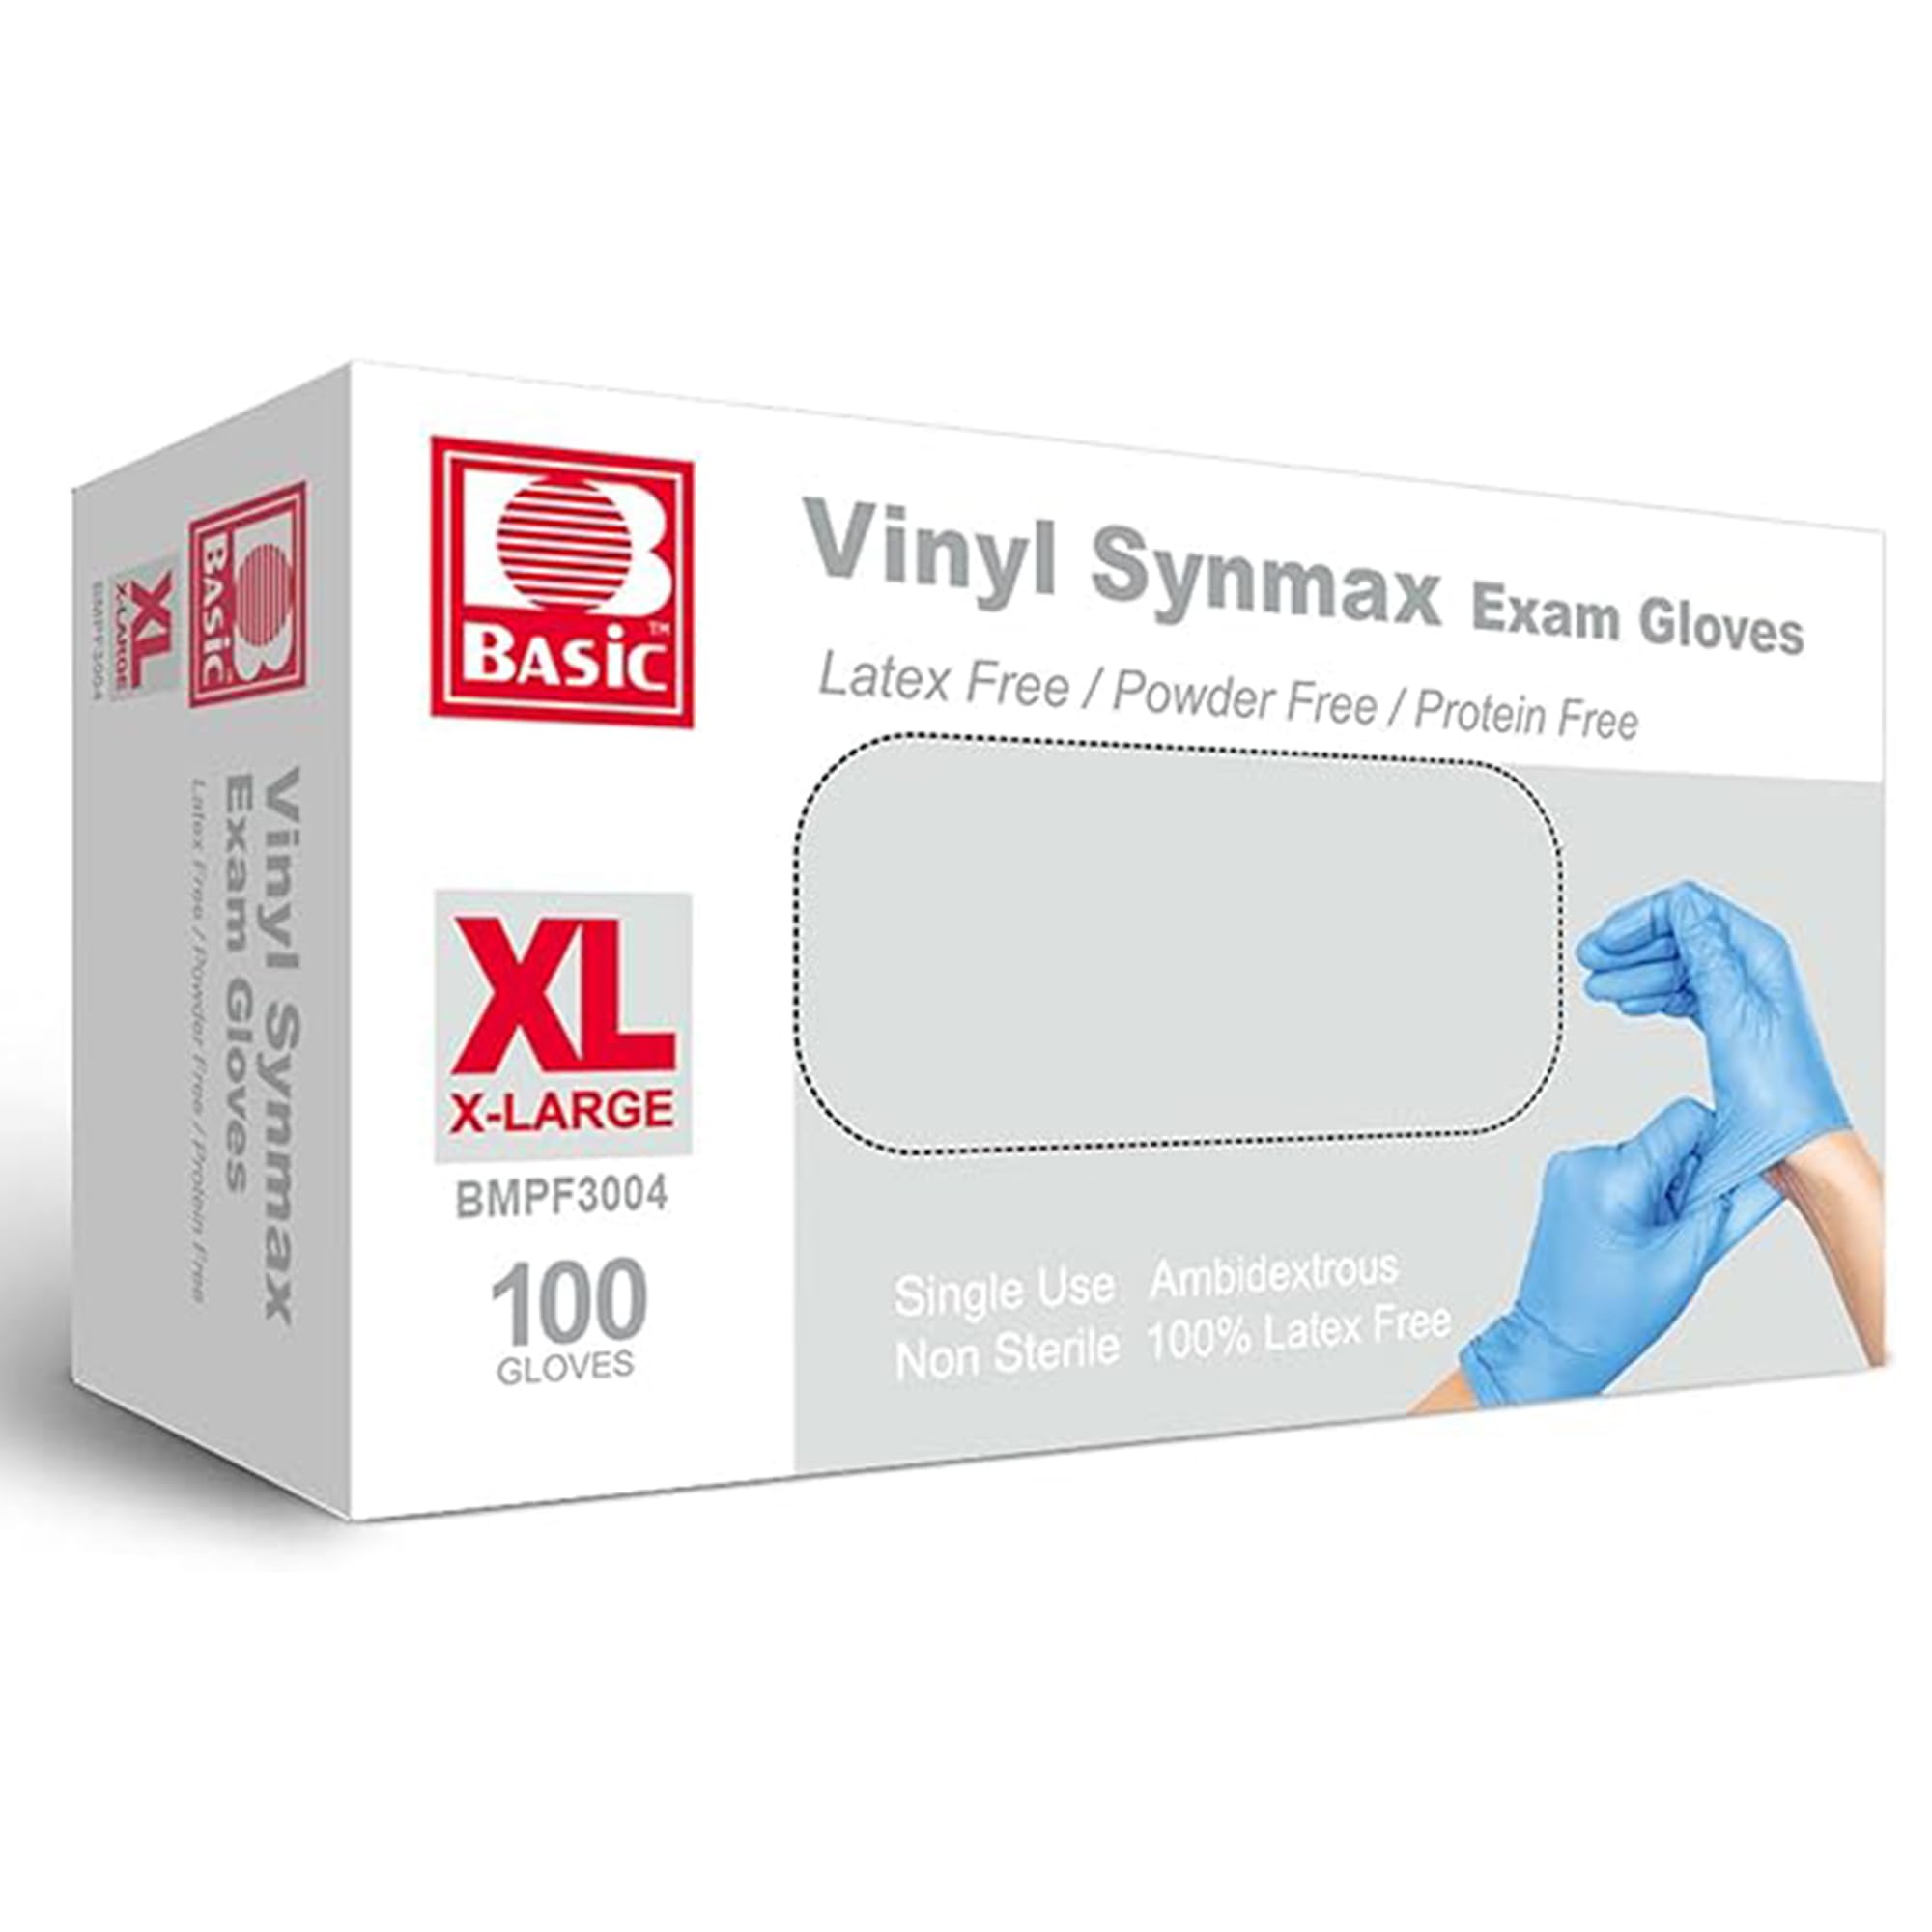 Jointown Basic Medical Synmax Vinyl Exam Gloves - Latex-Free & Powder-Free - X-Large, BMPF-3004 Blue Box of 100